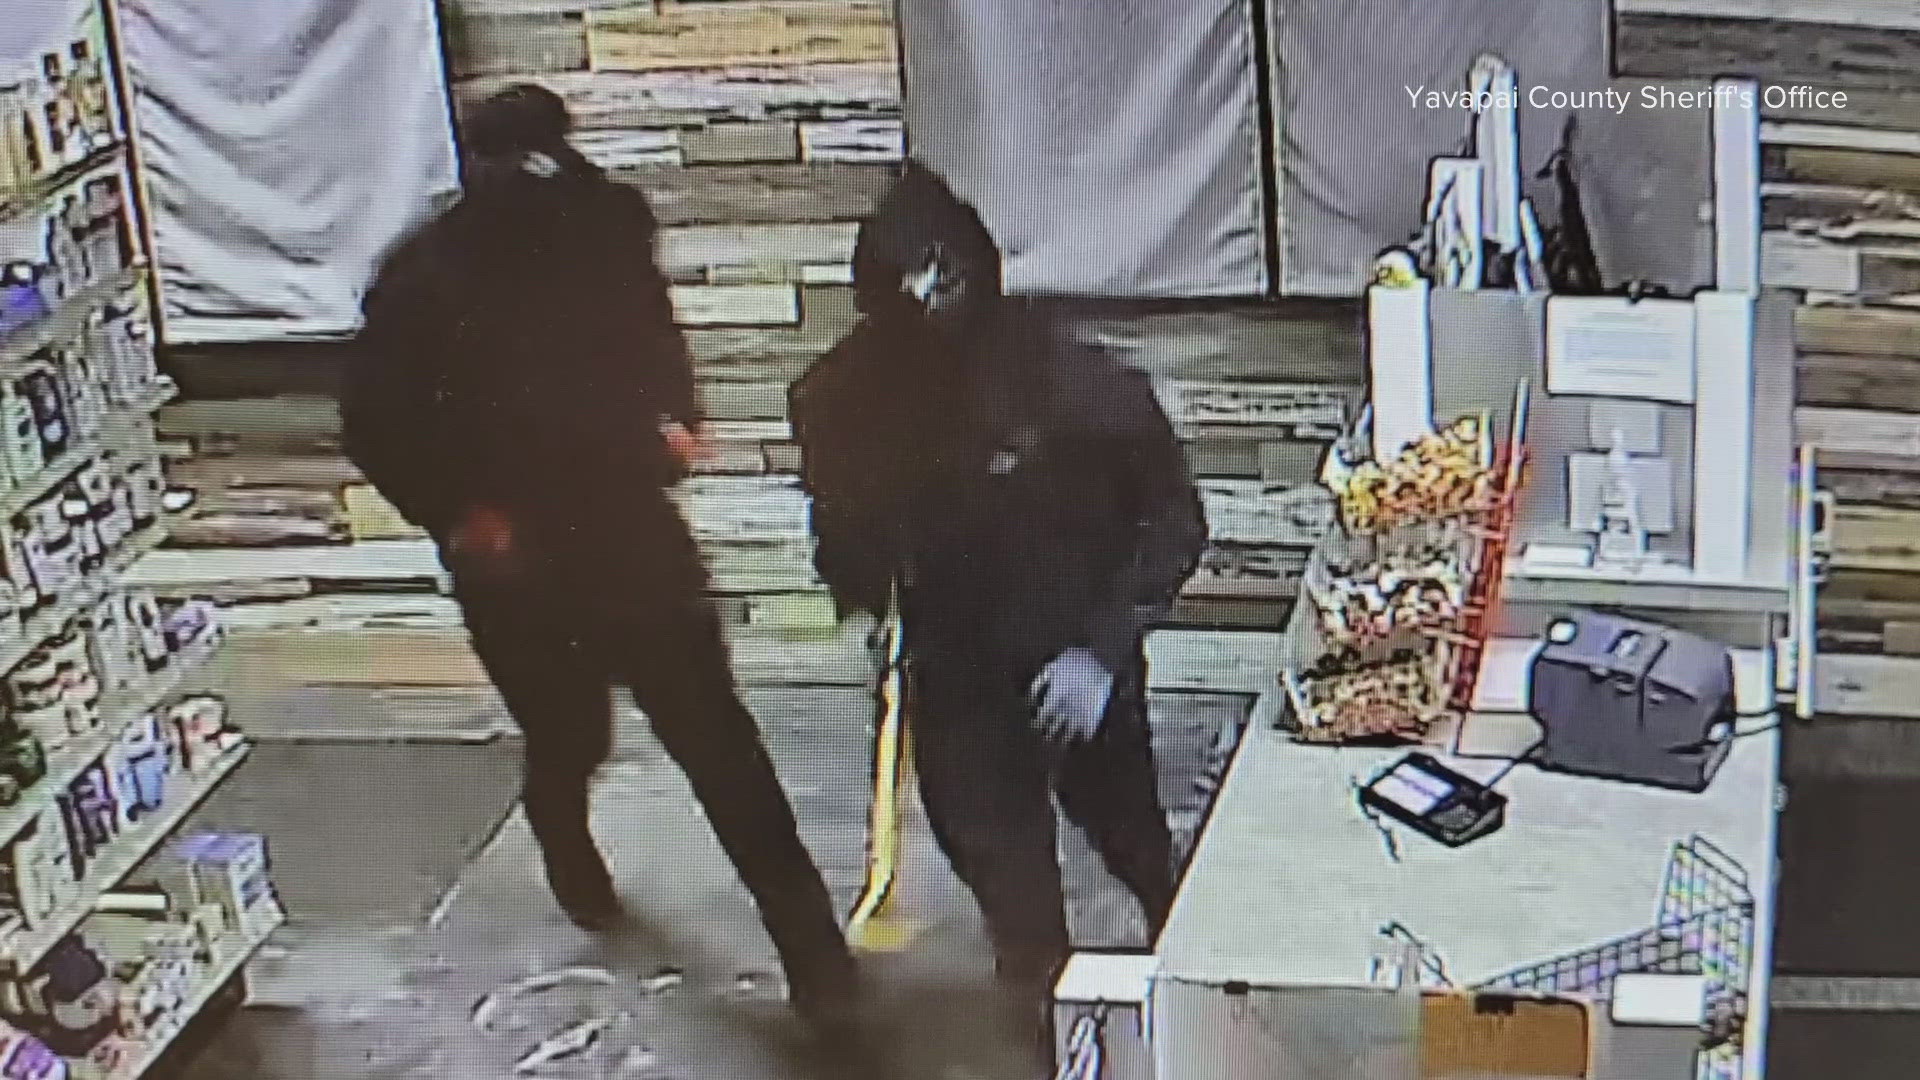 The Yavapai County Sheriff's Office is asking for the public's help in identifying the suspects who broke into a pharmacy and stole narcotics.